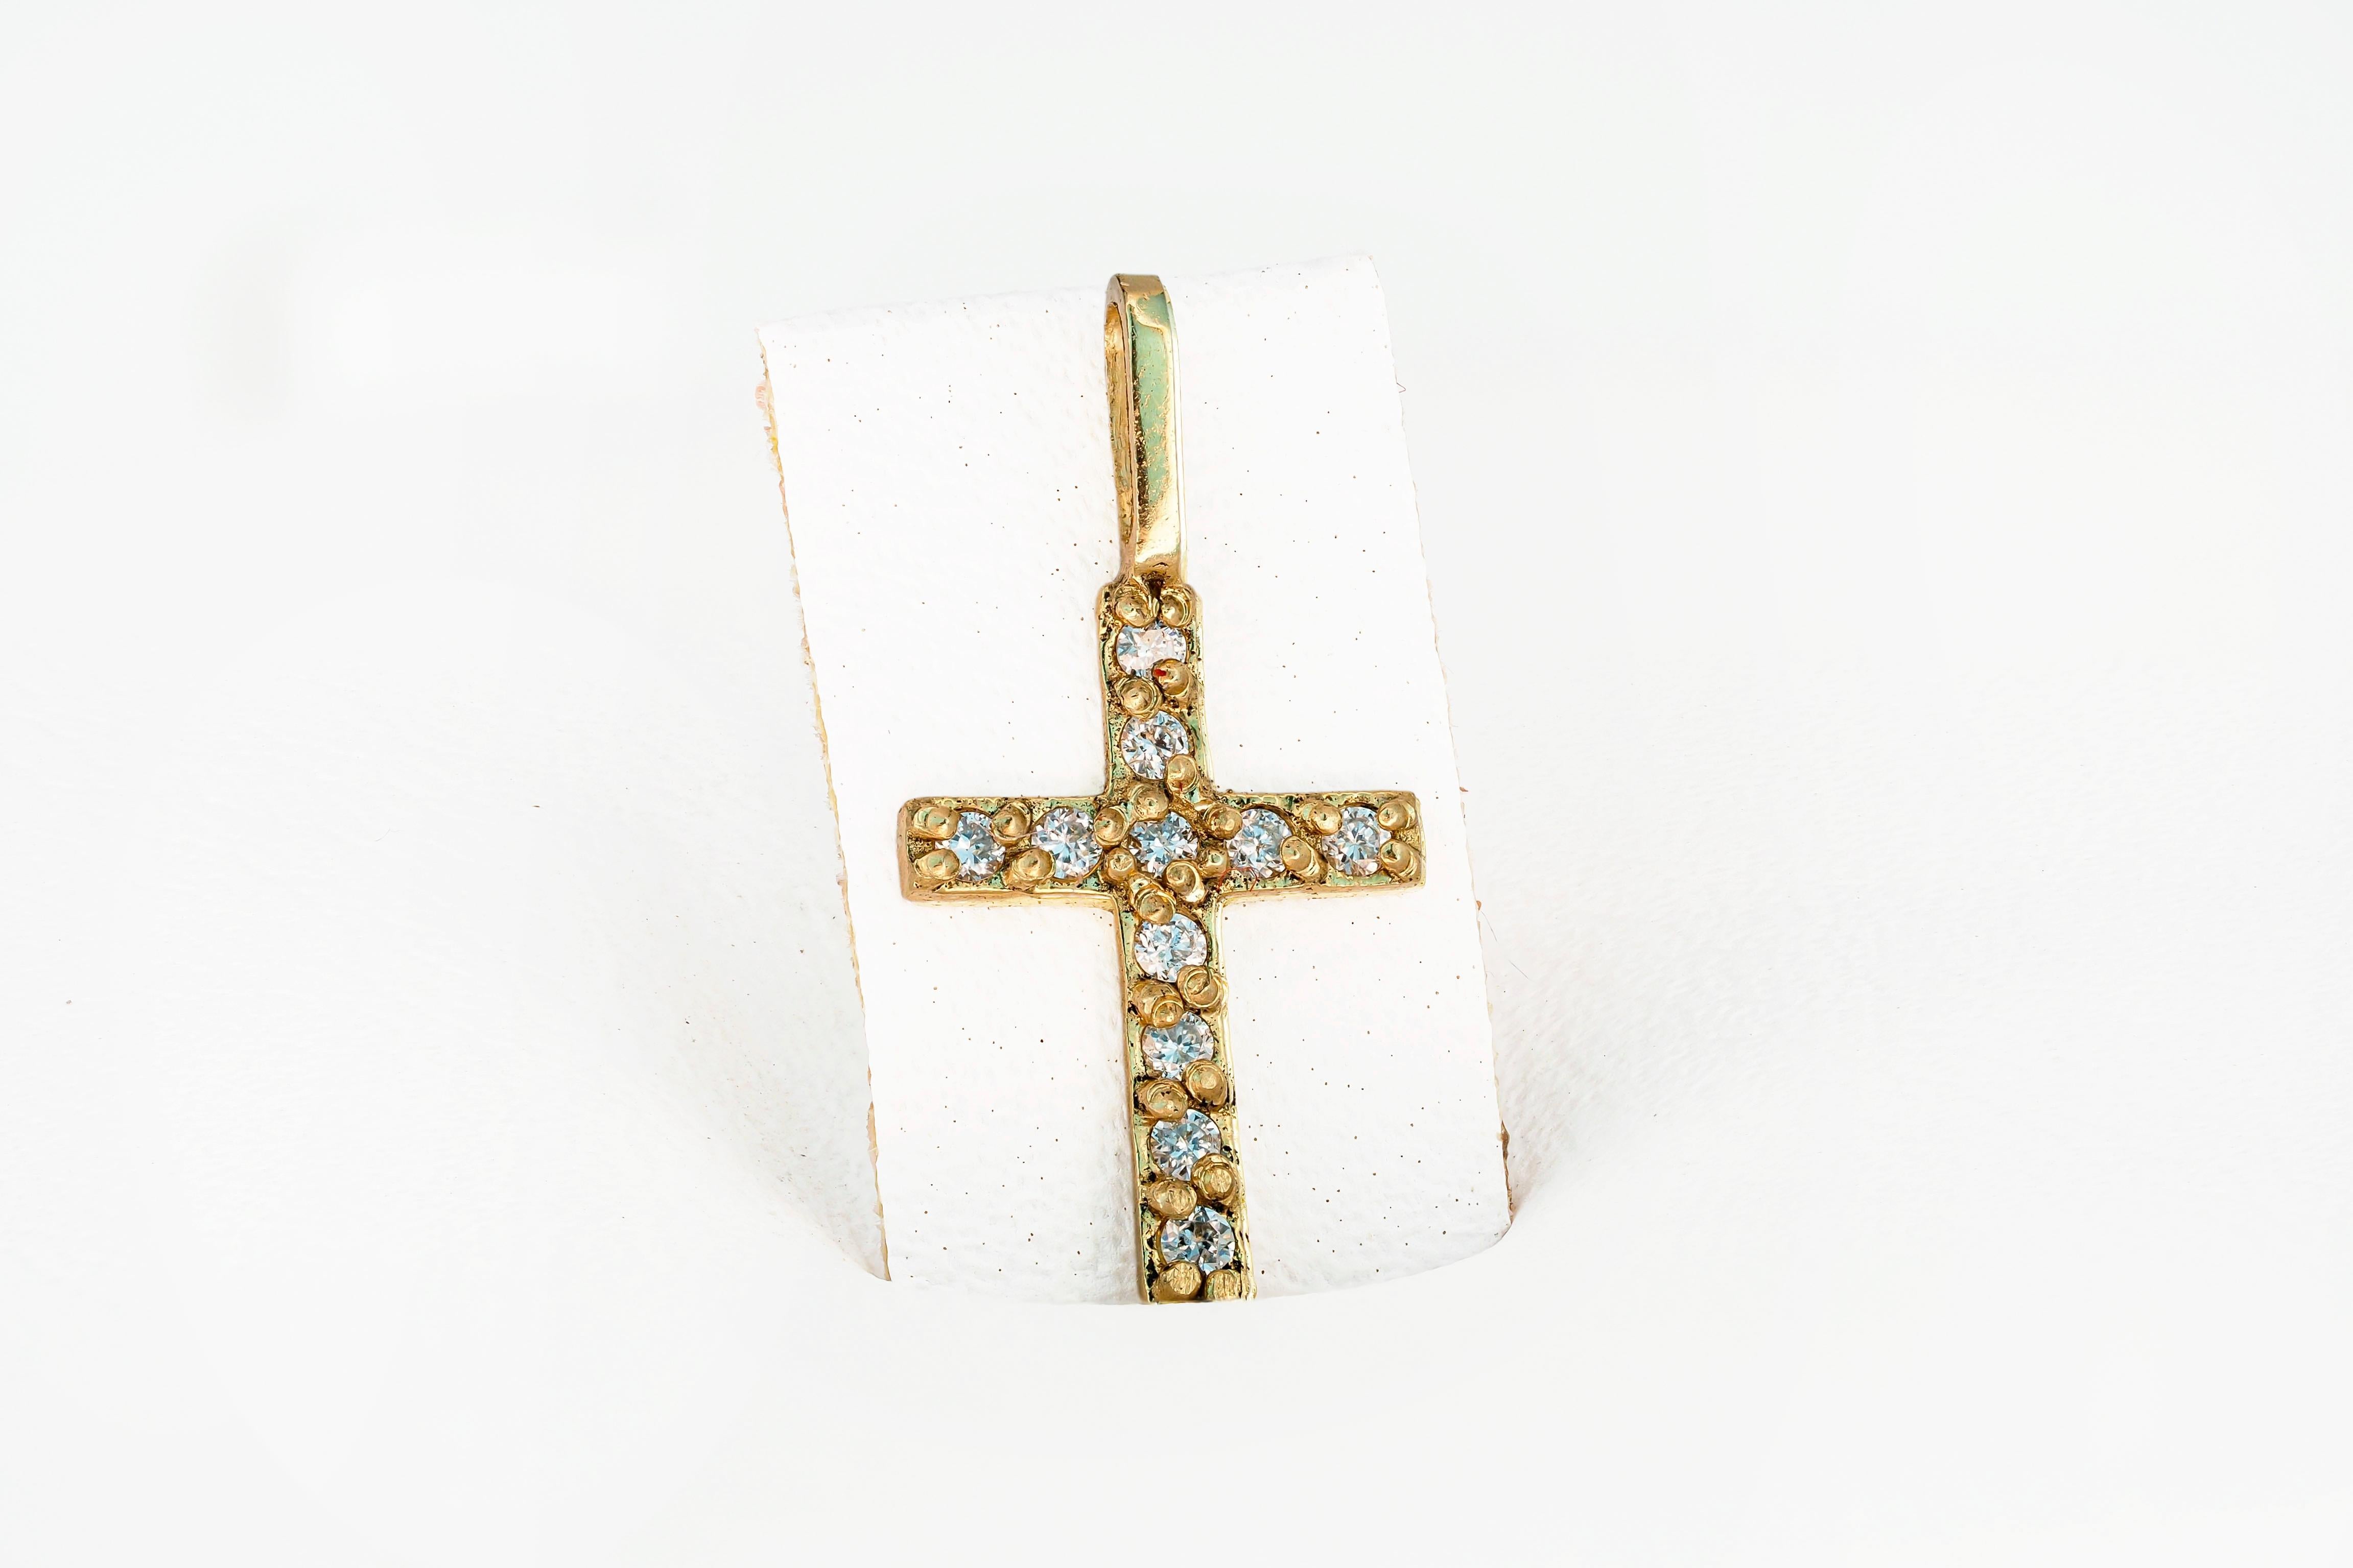 Cross pendant with diamonds
Weight: 1 g.
Gold - 14 karat yellow gold
Size -  20x12 mm

Stones:
Genuine Diamonds 11 pieces, G/VS, round brilliant cut, 11x0.01=0.11 ct

- Pendant making for order. 
- It could be done in white, yellow or rose 14kt